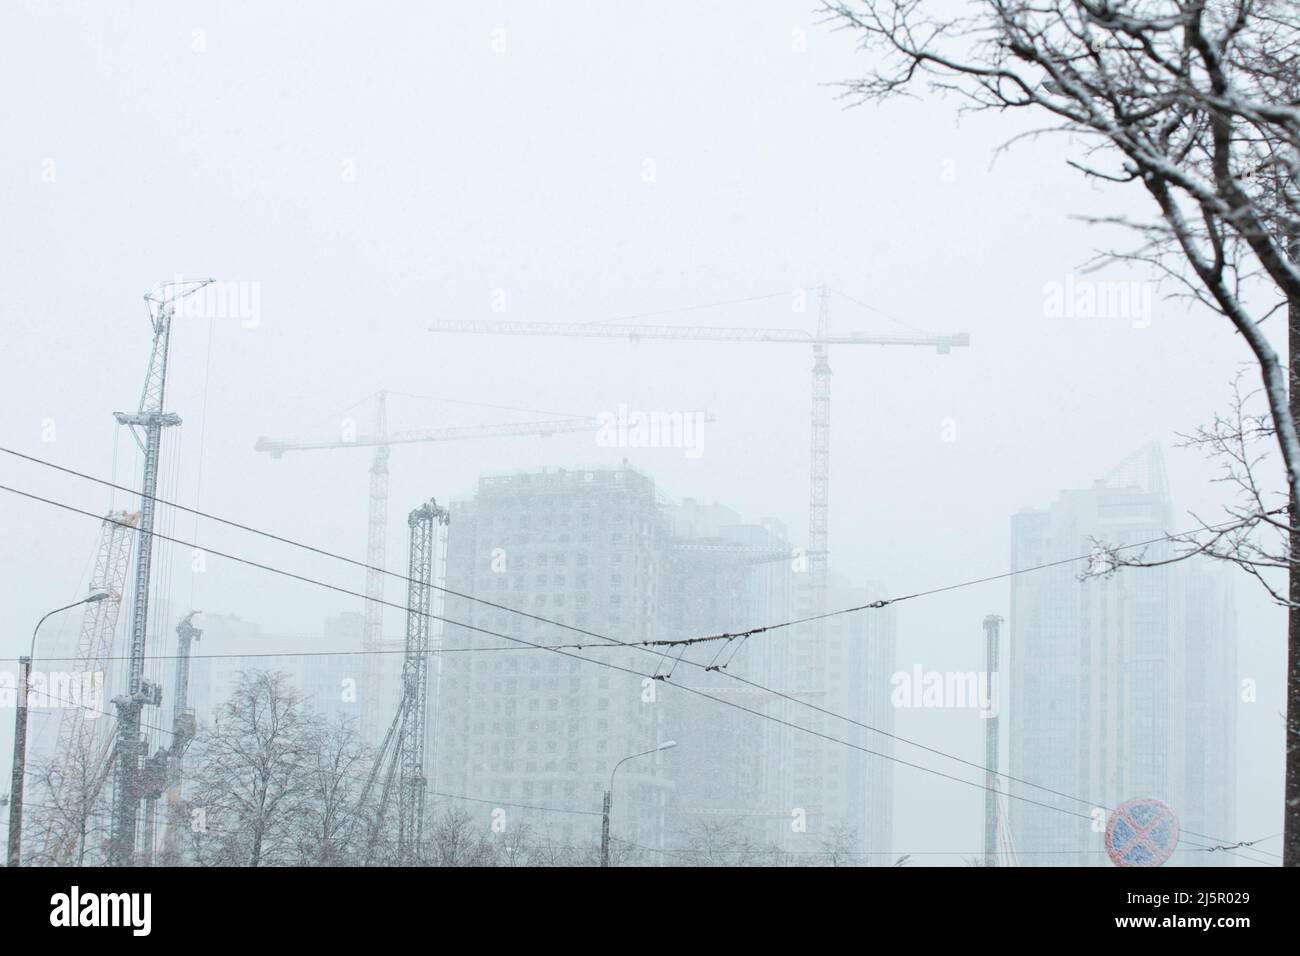 skyscrapers in the background covered in snow during a winter snowstorm Stock Photo